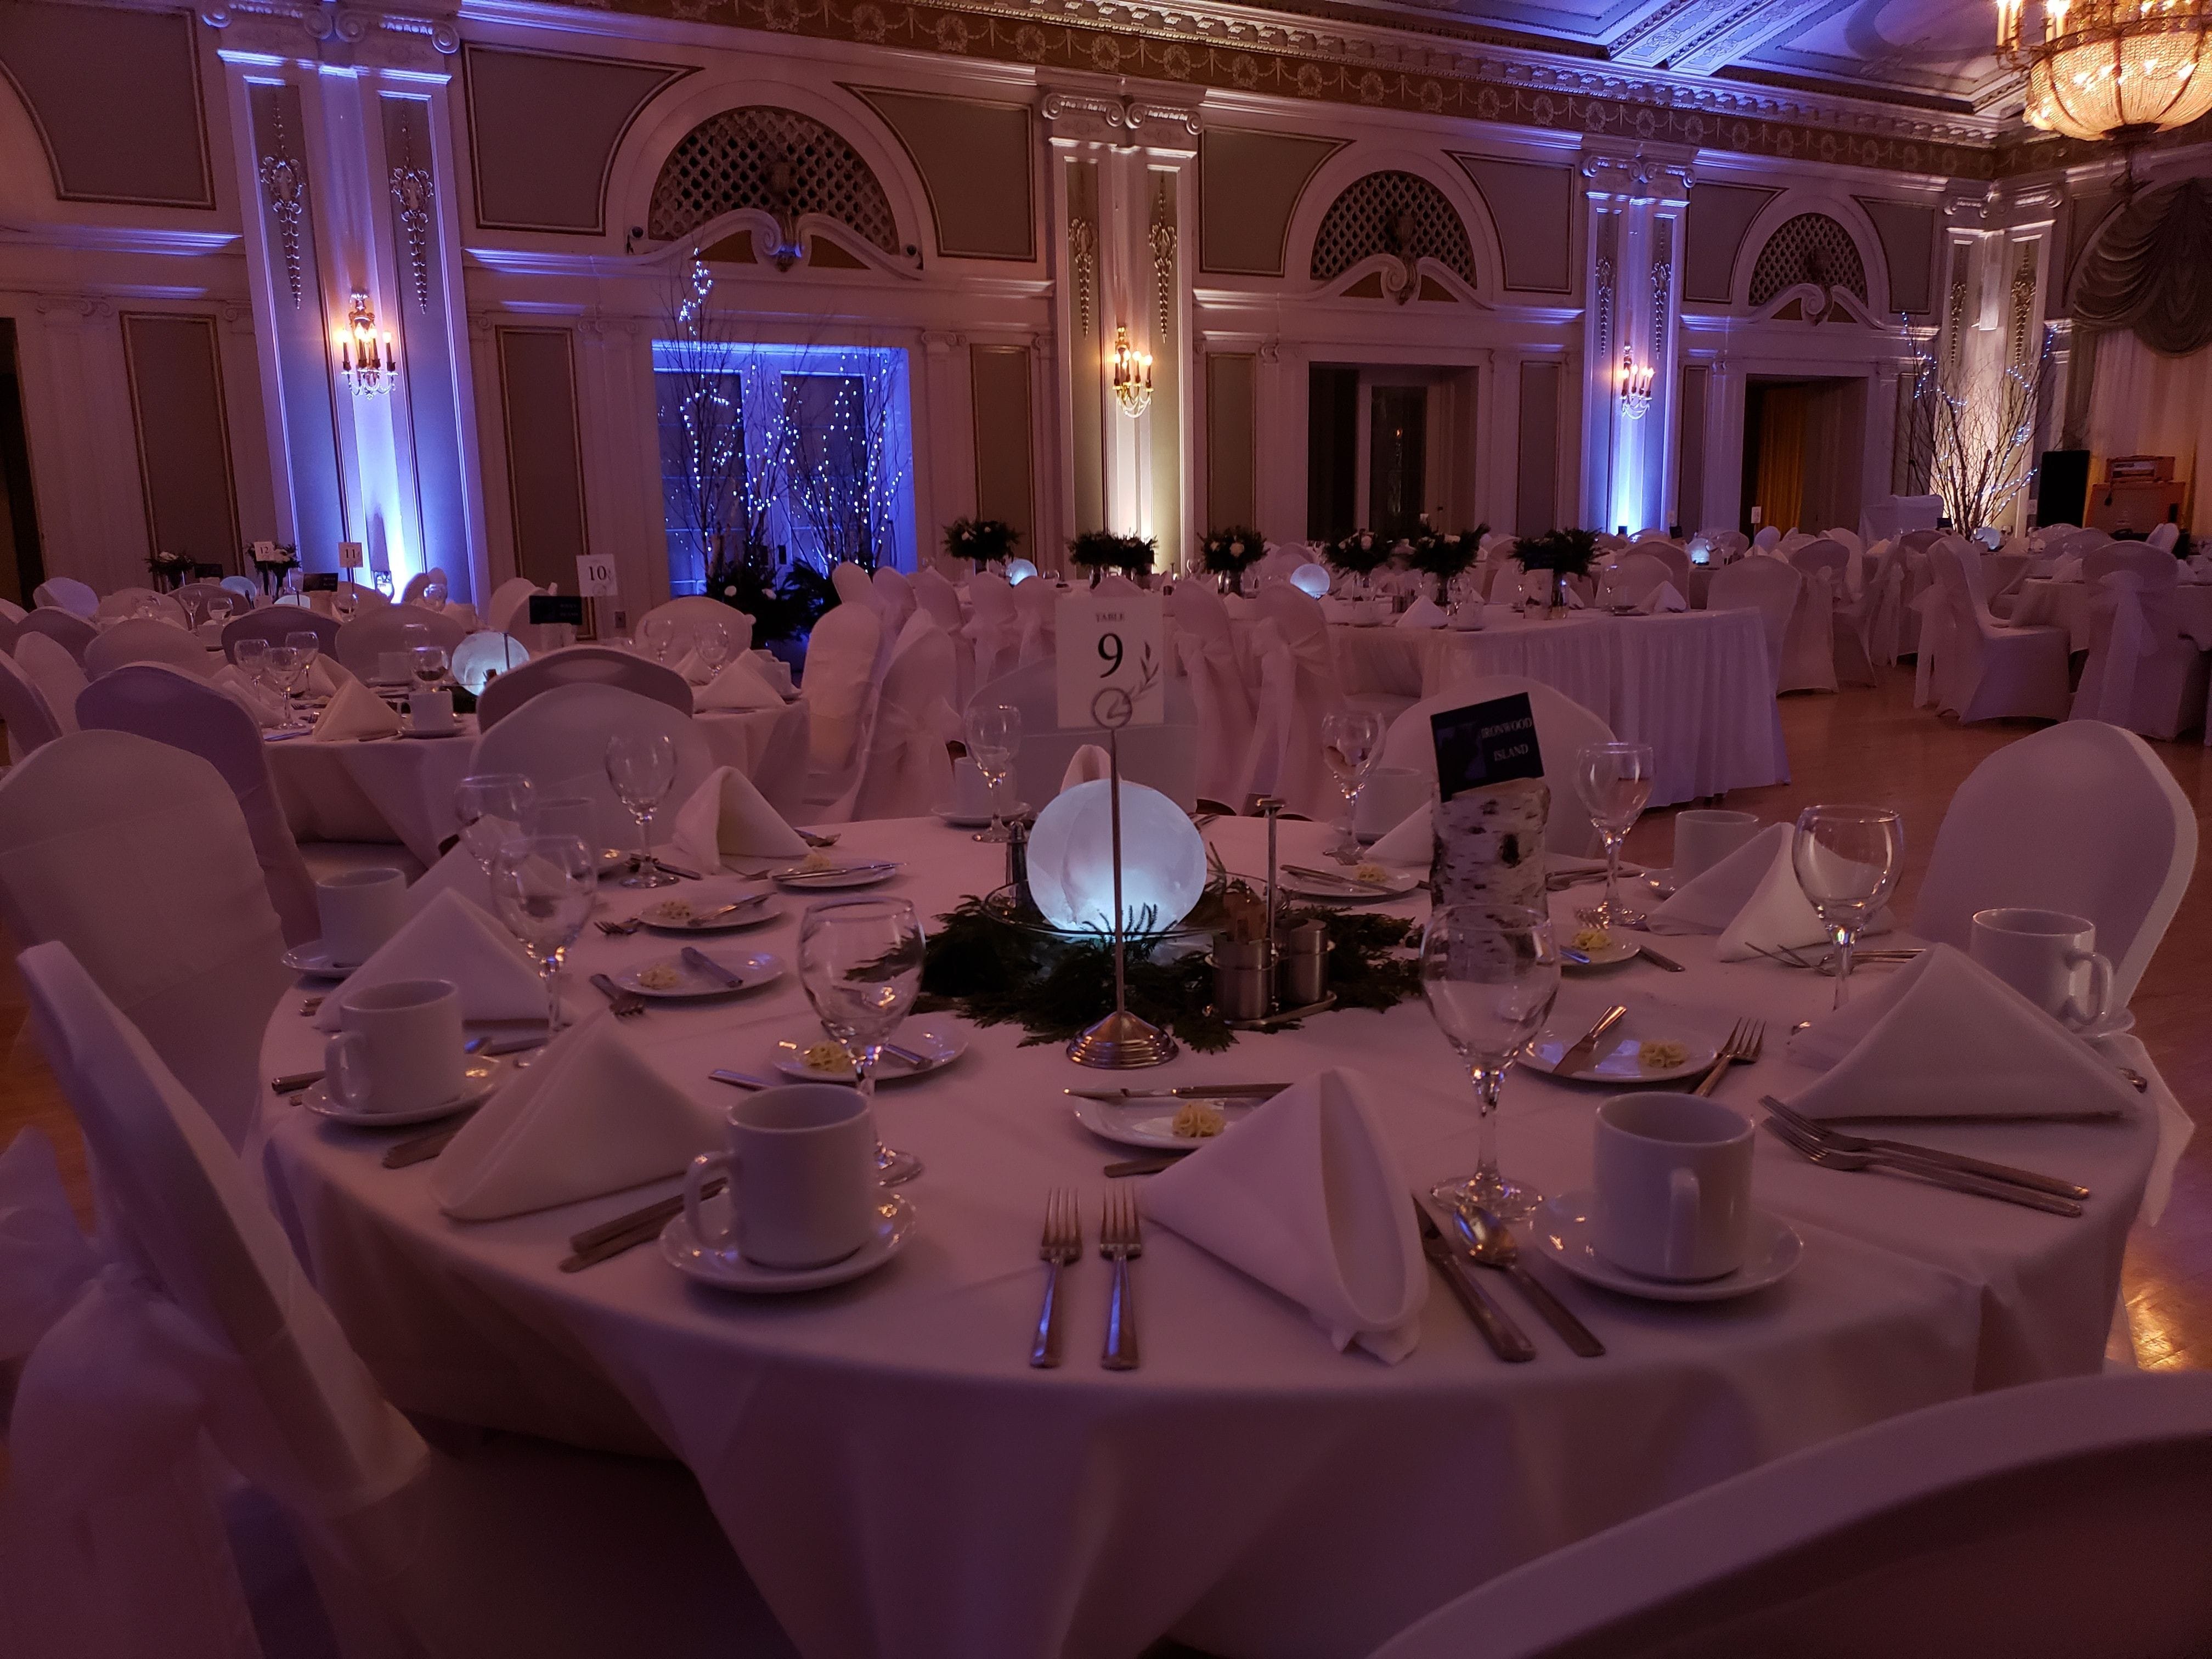 Wedding lighting at Greysolon Ballroom. Up lighting in ice blue and soft white.